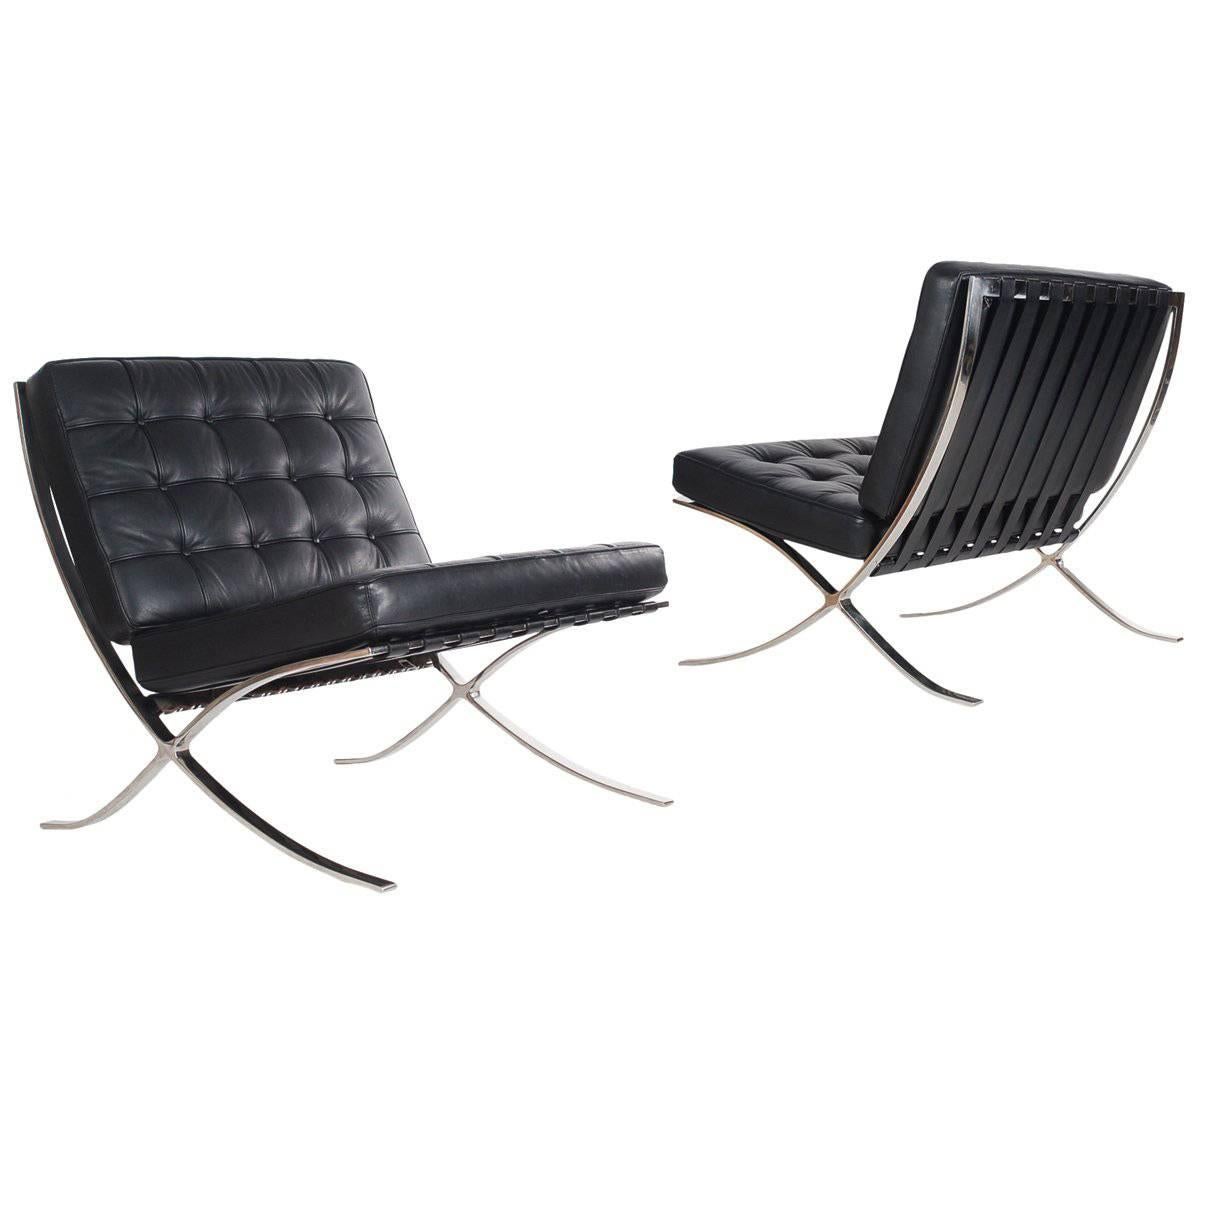 Signed Pair of Mid-Century Modern Knoll Barcelona Chairs by Mies van der Rohe